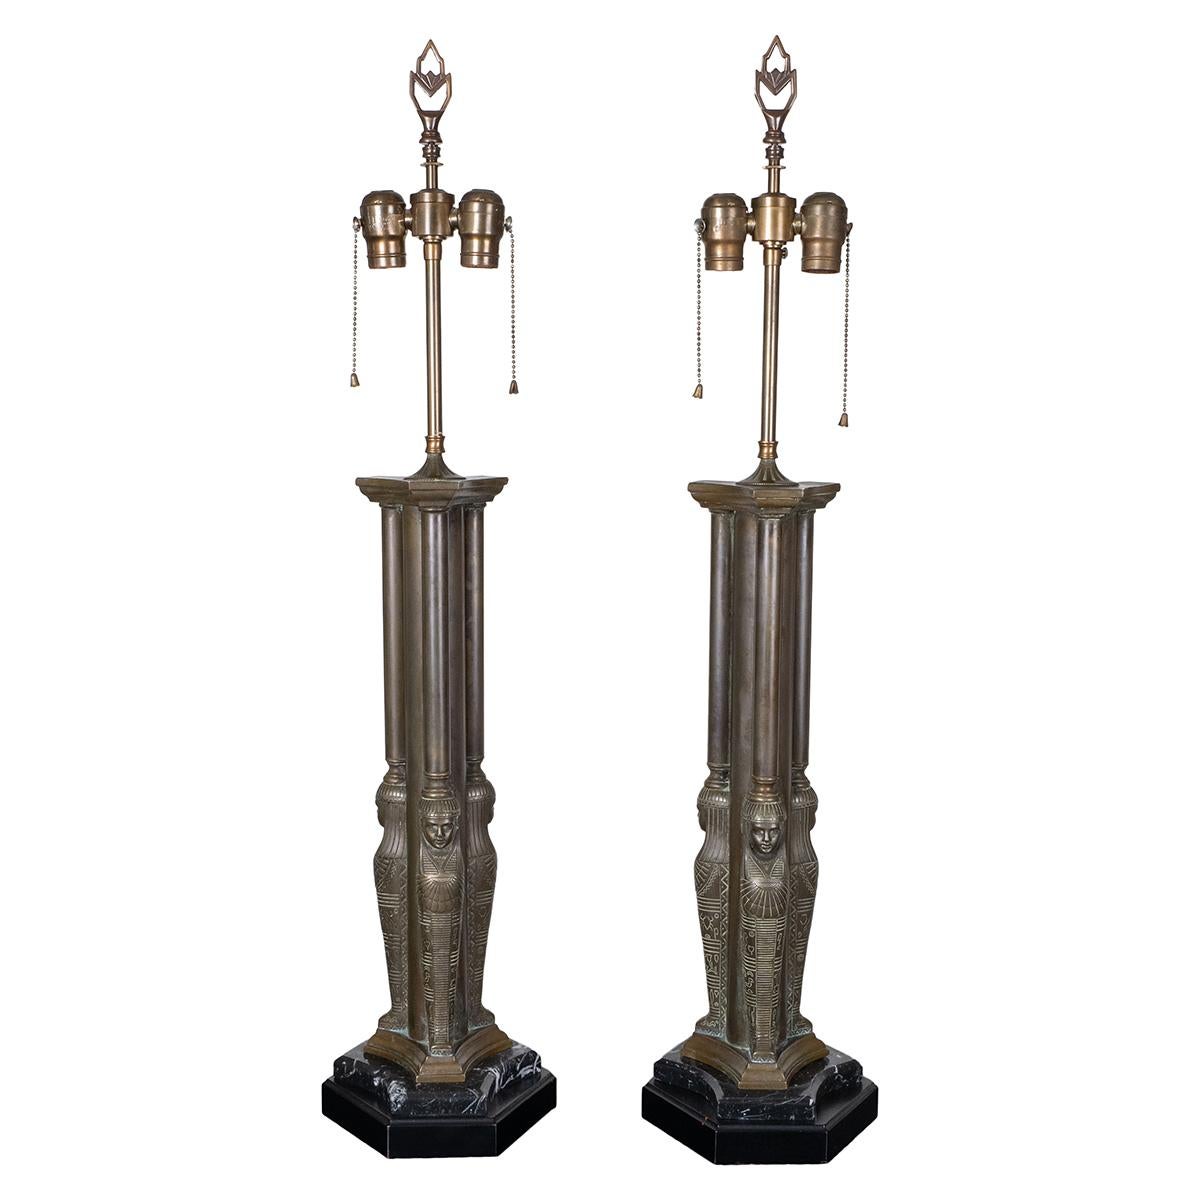 Pair of bronze table lamps depicting Egyptian figureheads on wood and marble bases.